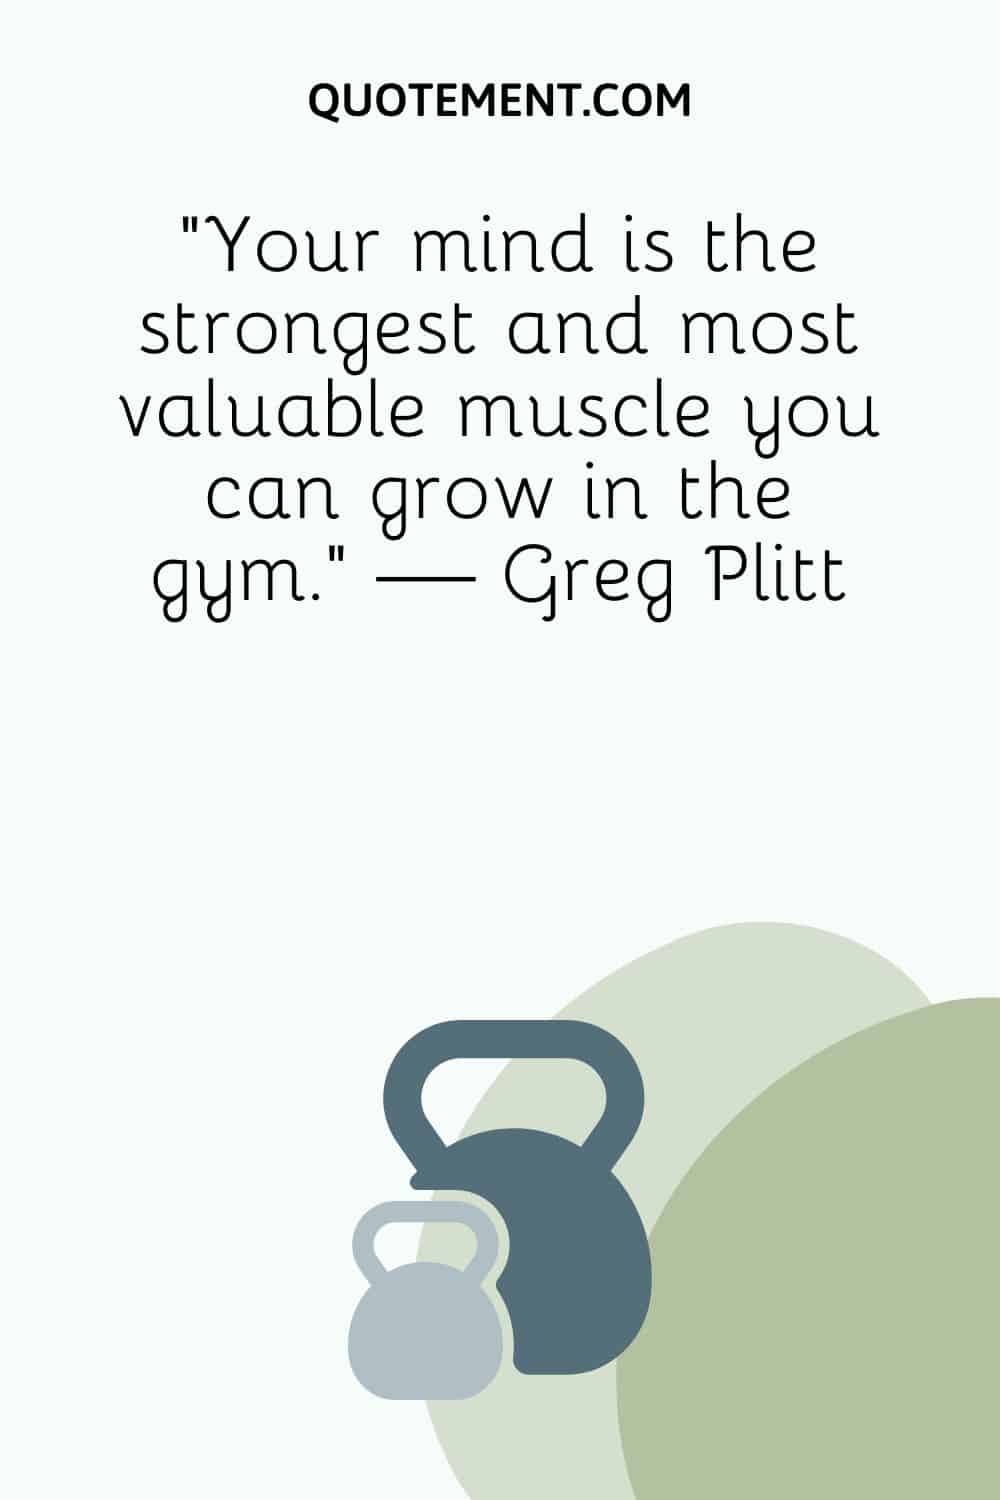 kettlebells image representing top motivational gym quote